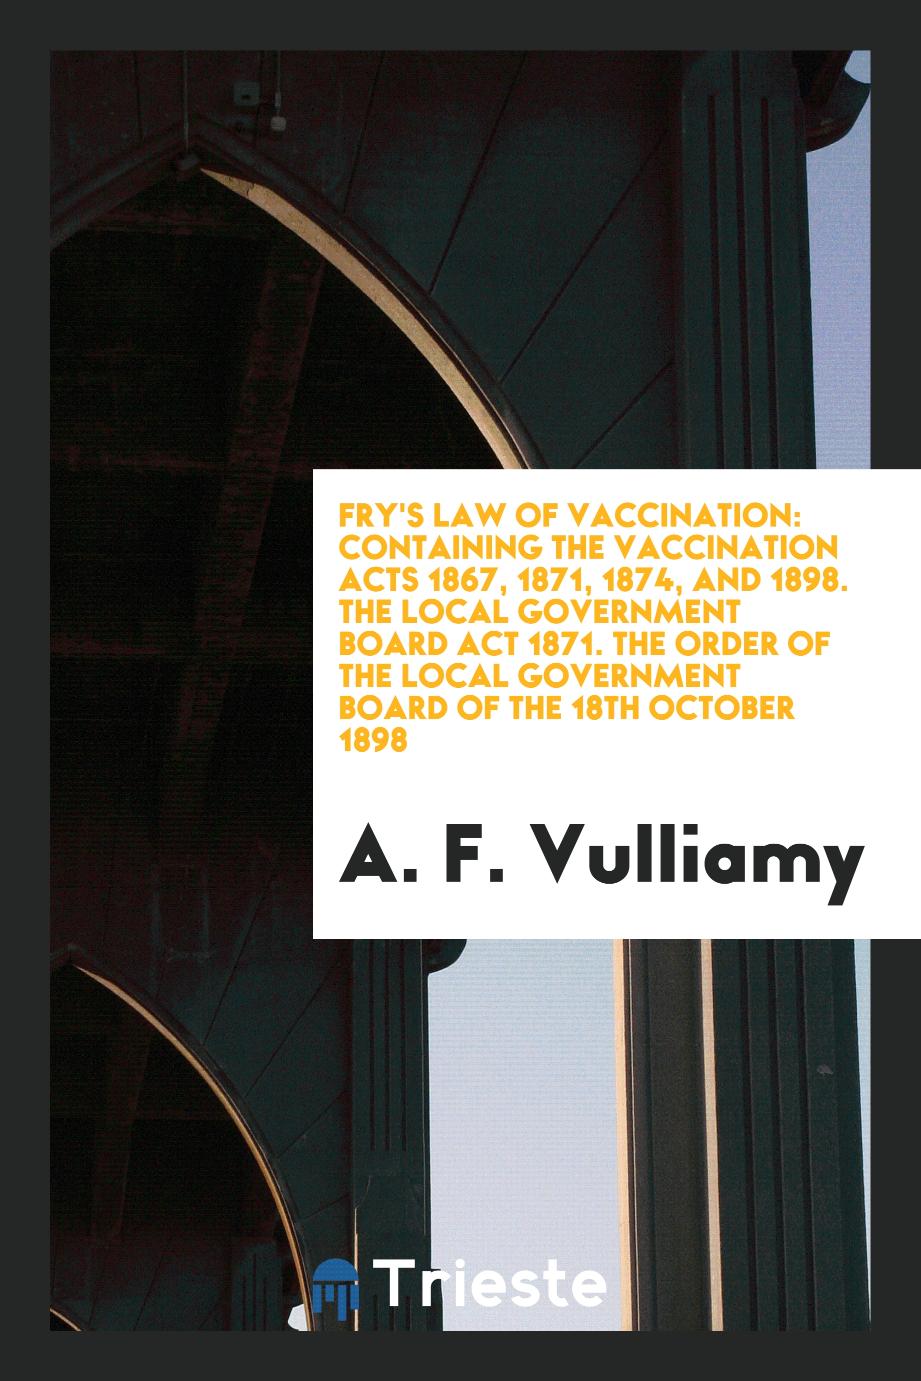 Fry's Law of Vaccination: Containing the Vaccination Acts 1867, 1871, 1874, and 1898. The Local Government Board Act 1871. The Order of the Local Government Board of the 18th October 1898